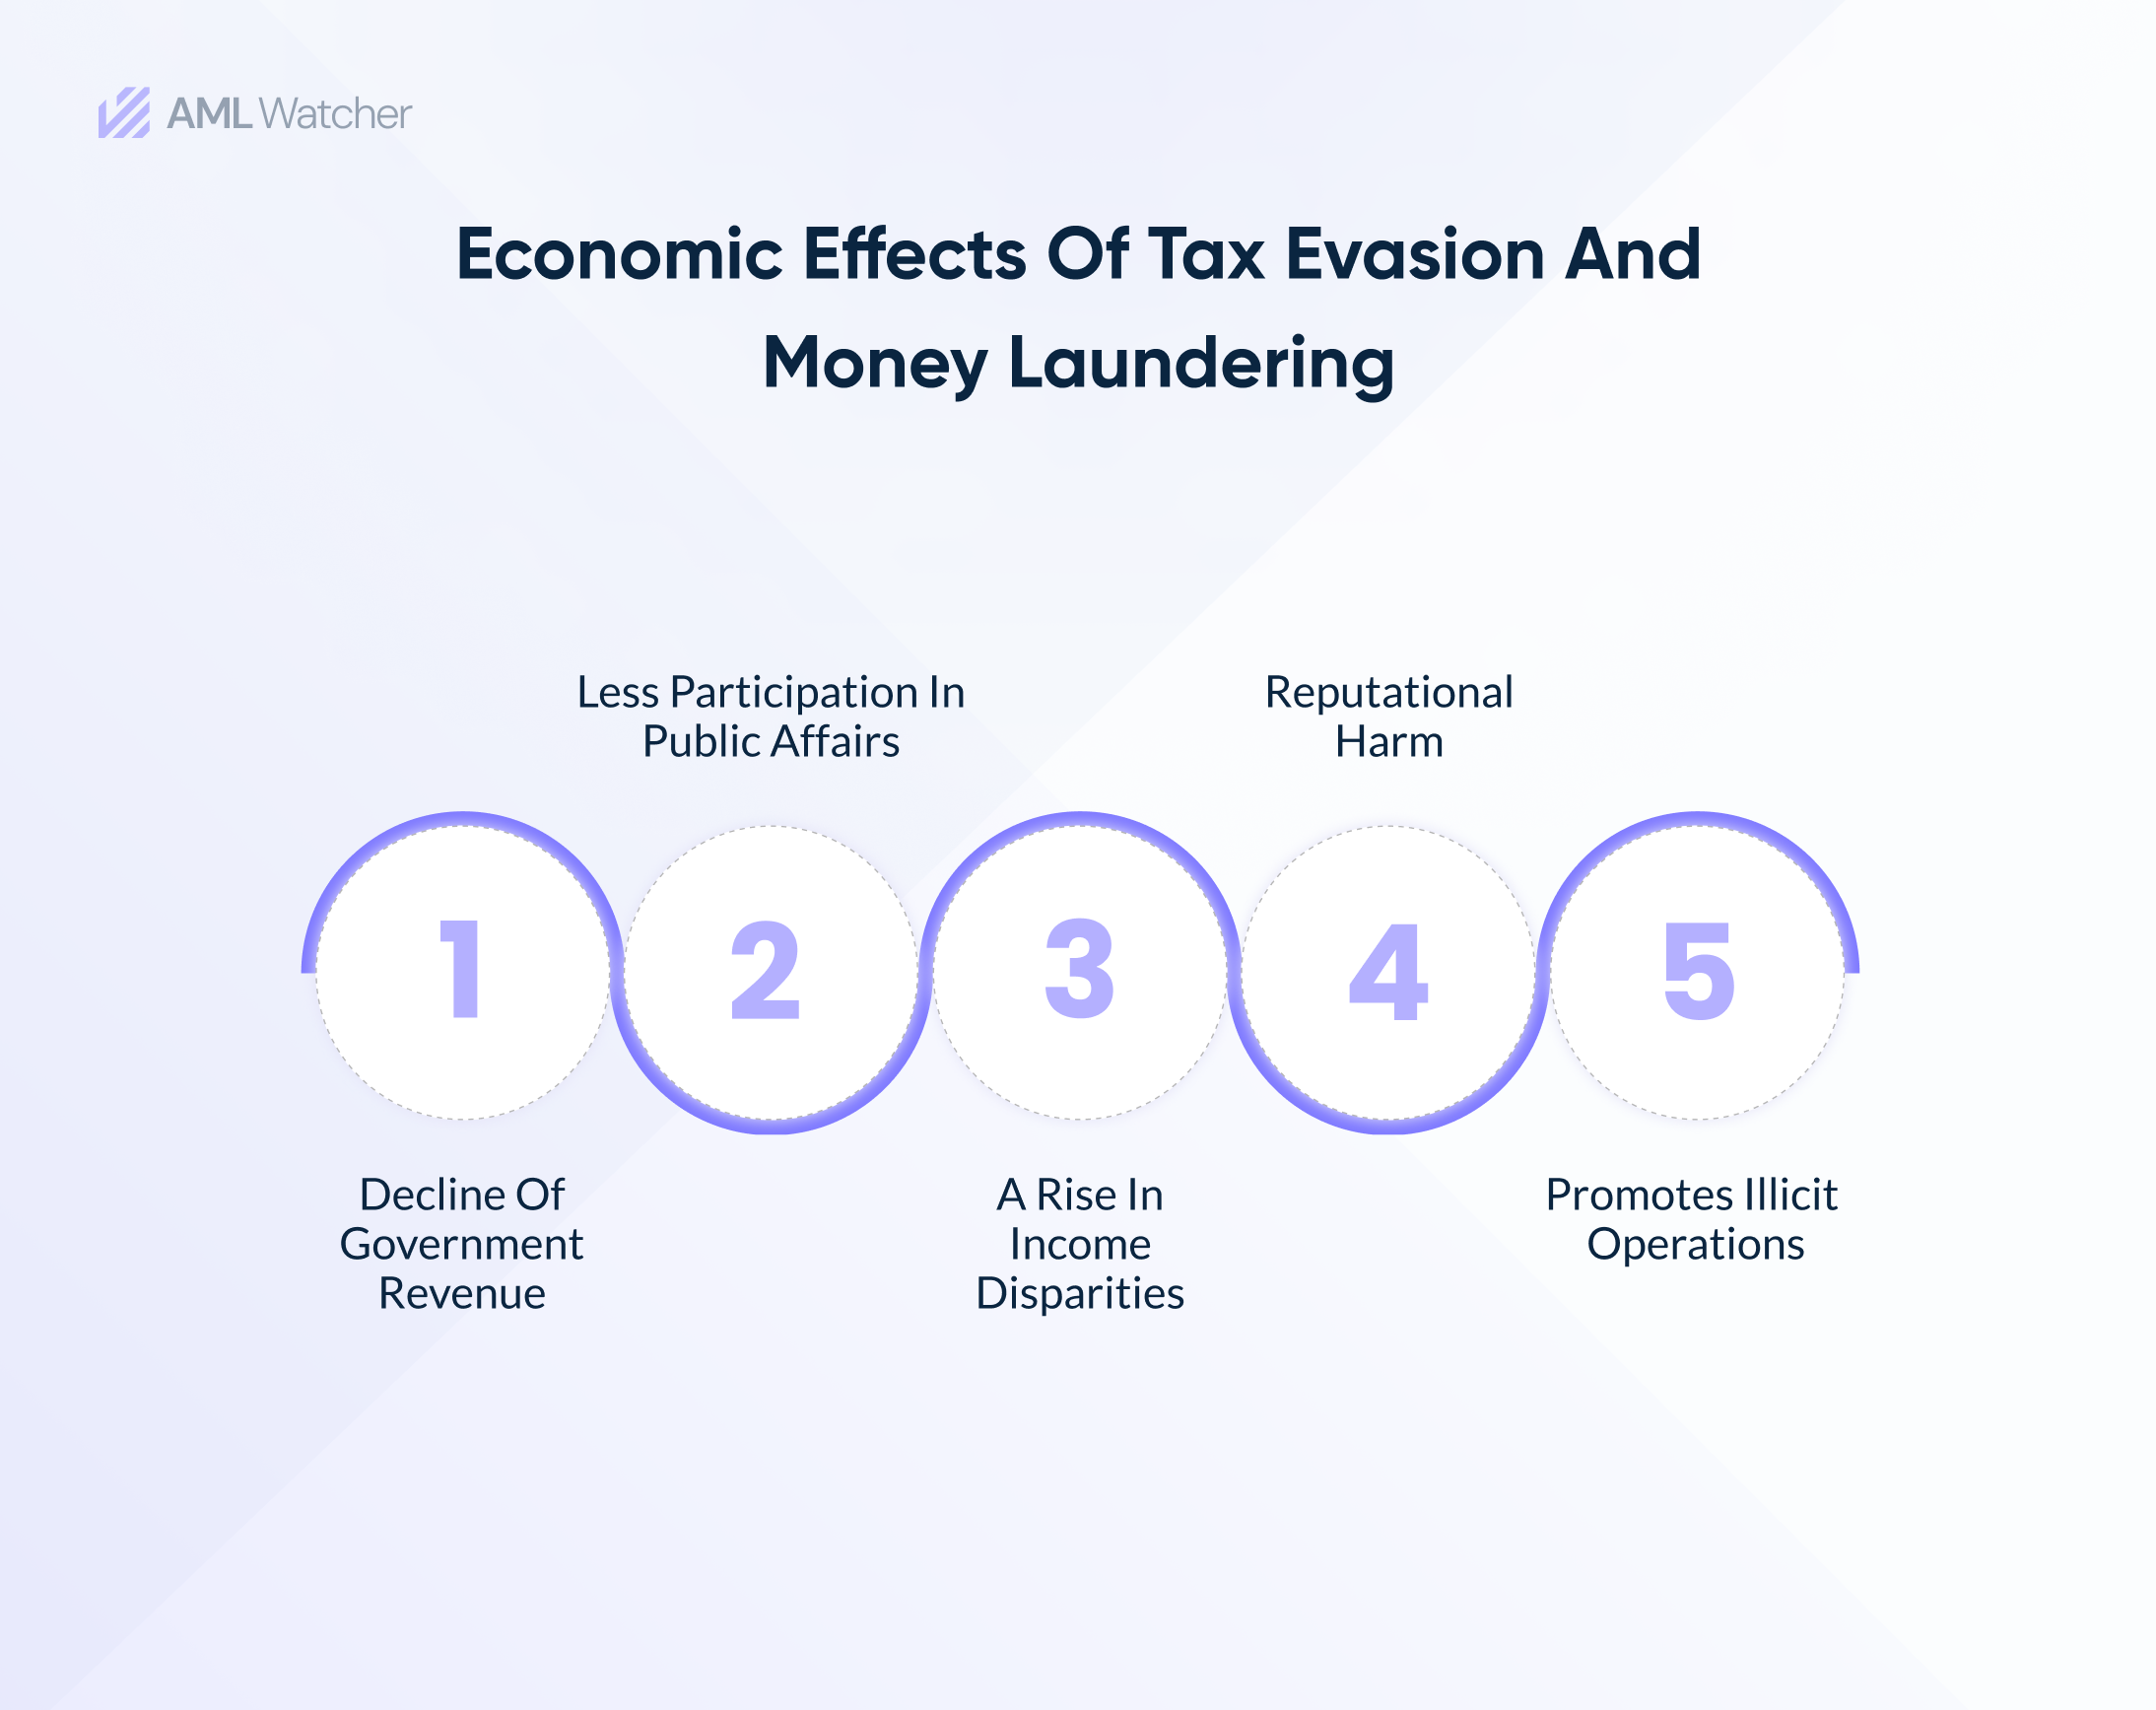 Economic Effects of Tax Evasion and Money Laundering